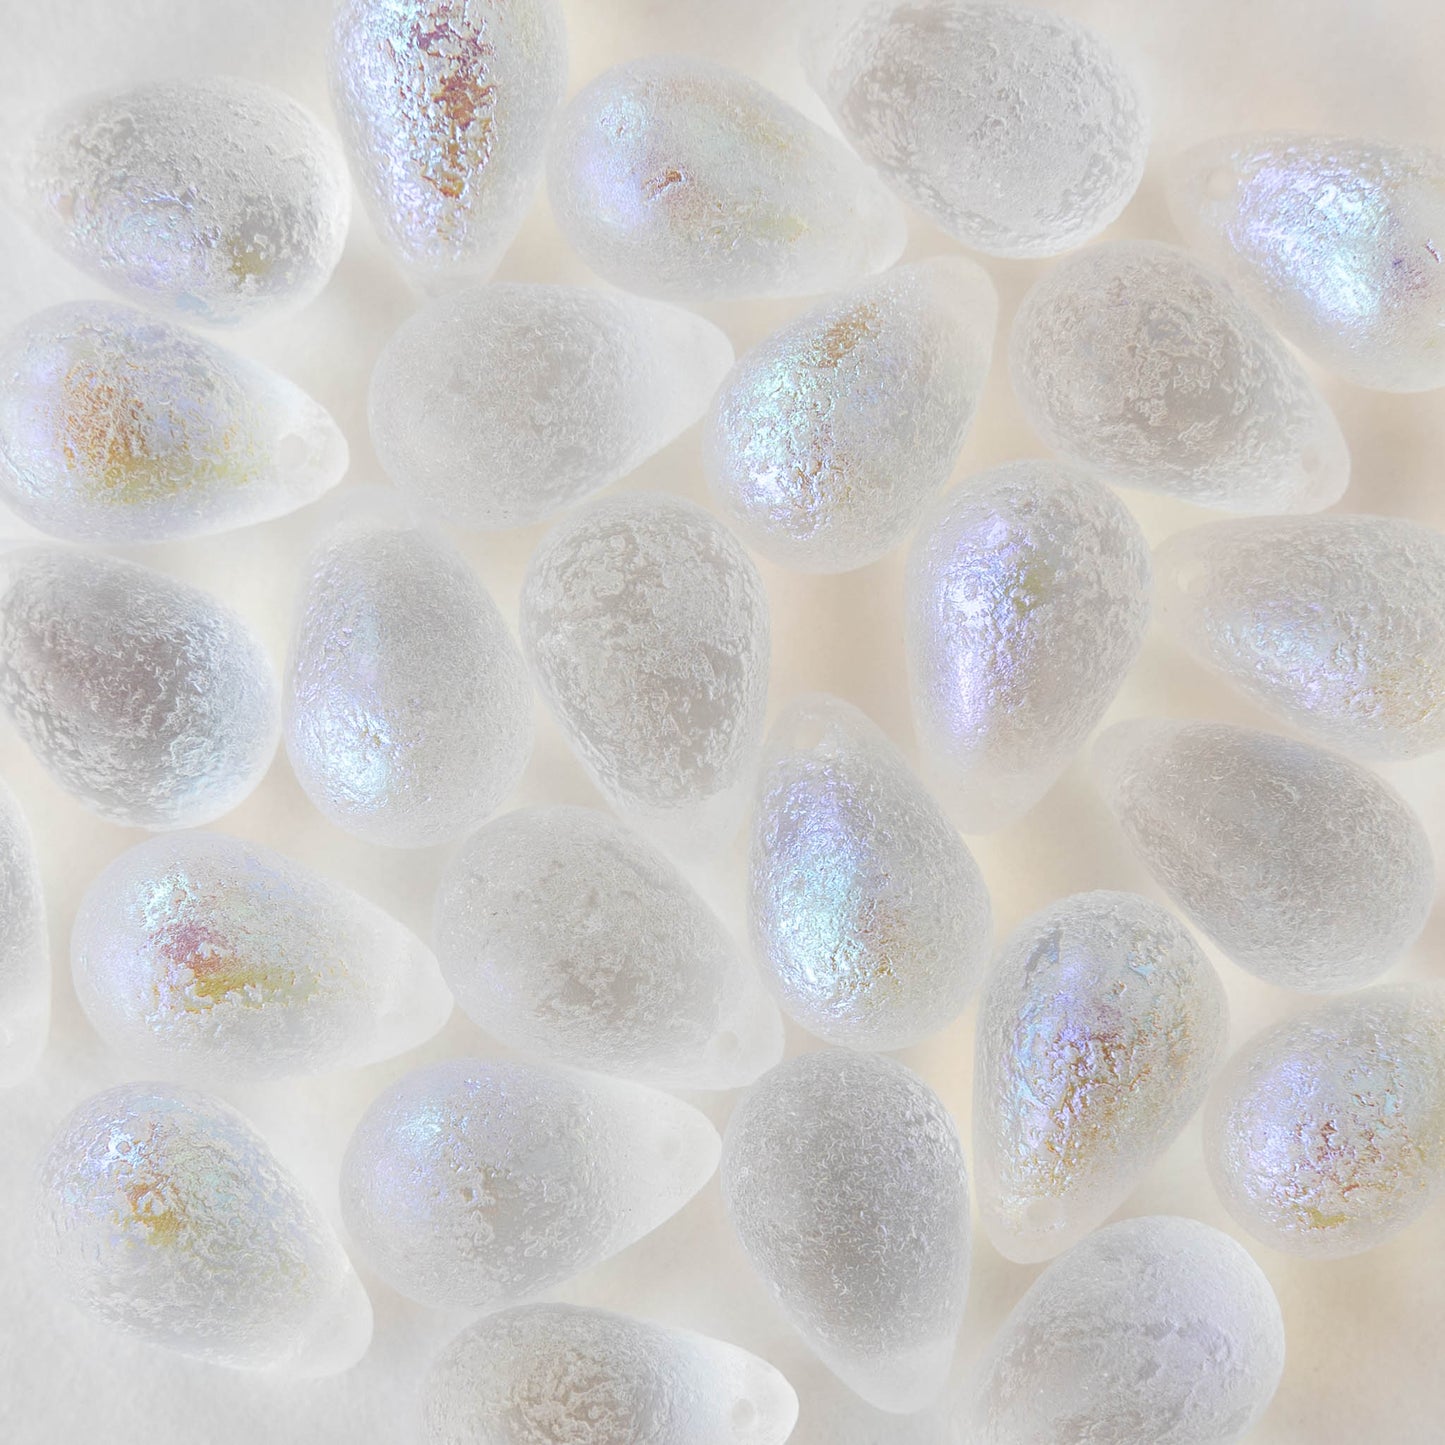 12x18mm Large Glass Teardrop Beads - Etched Crystal AB - 10 beads